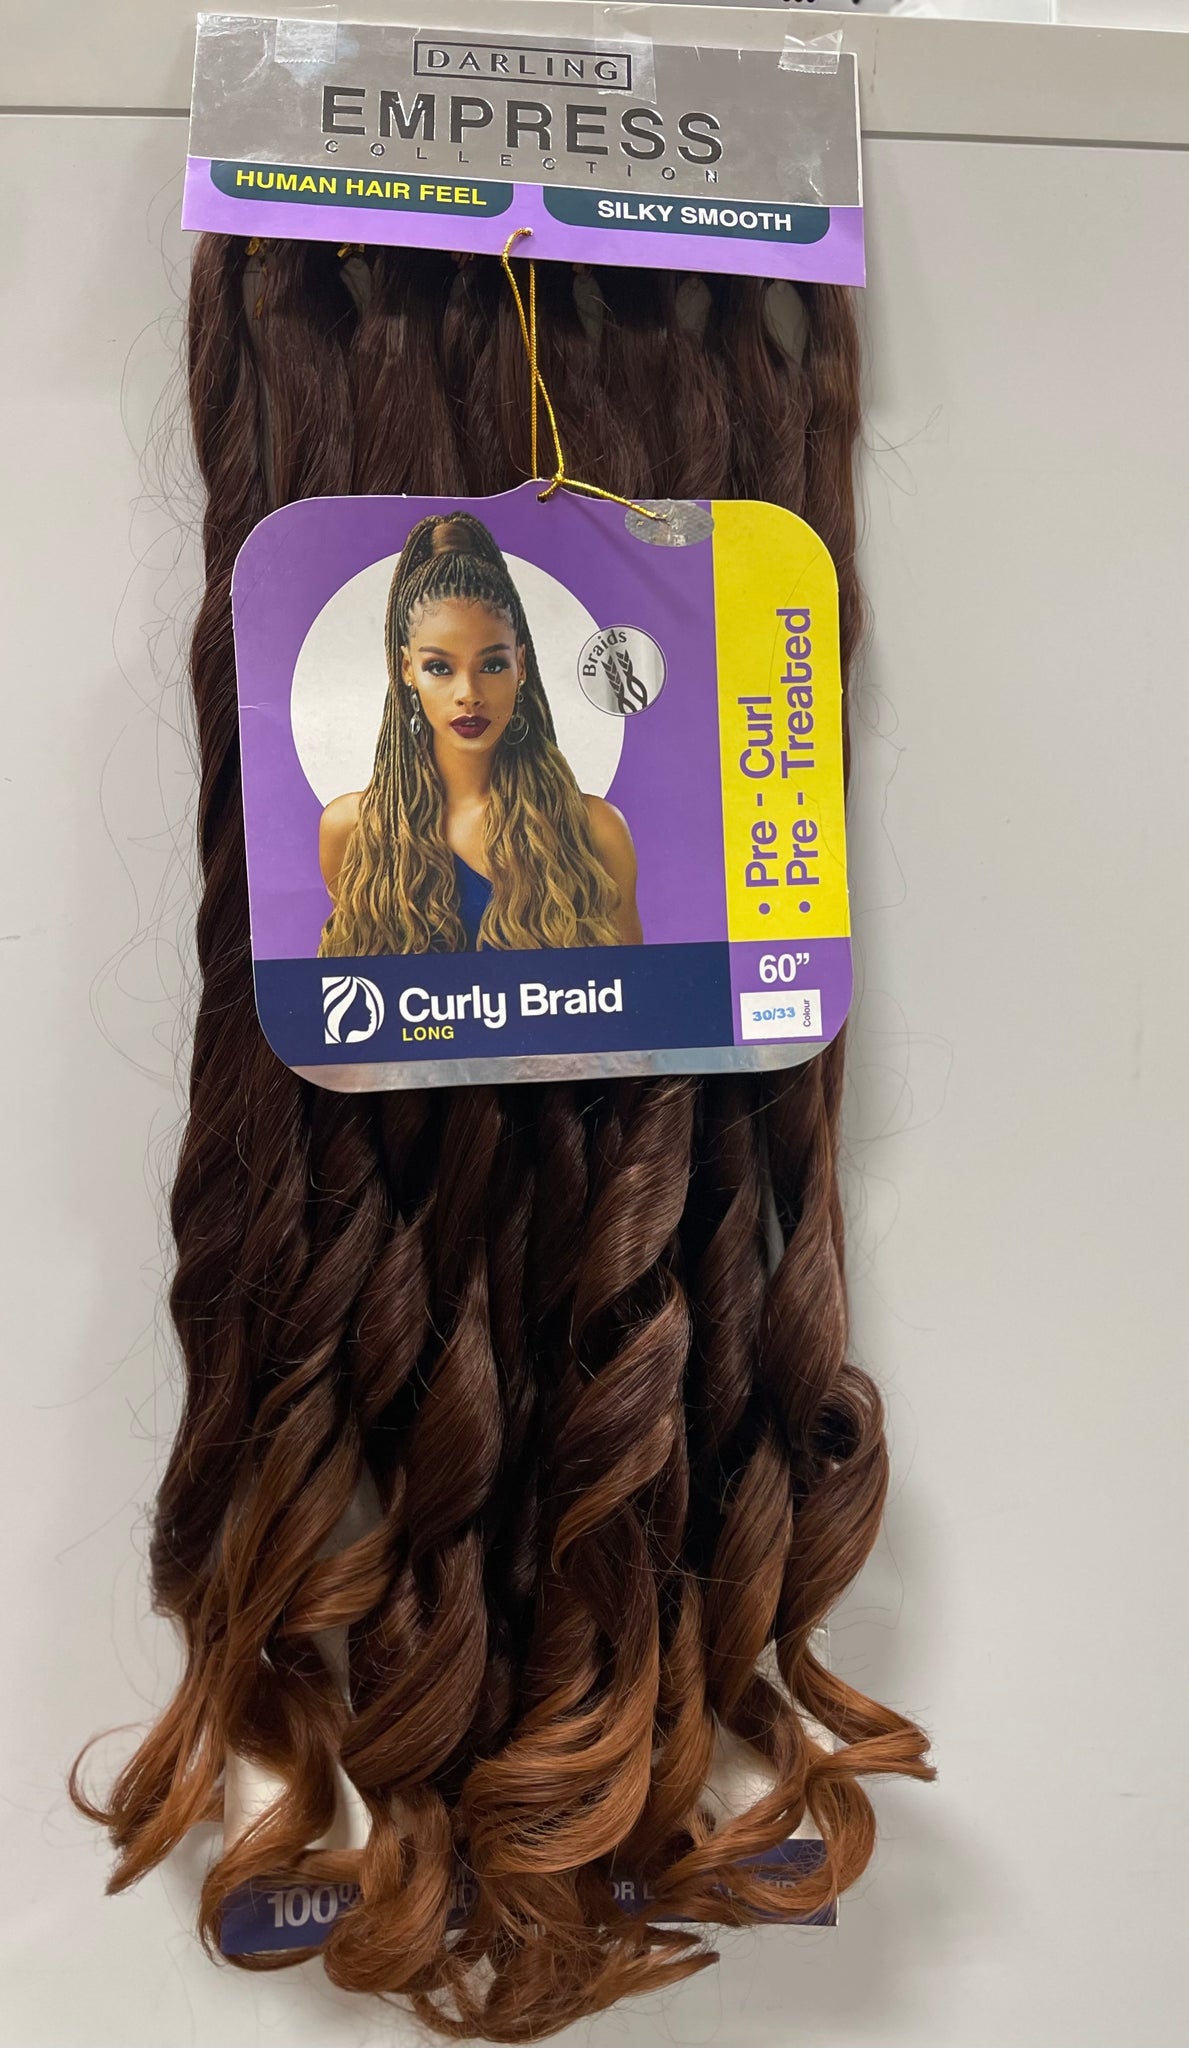 Darling Empress Collection Curly Braid - 6 Pack multi-Pack - 60"